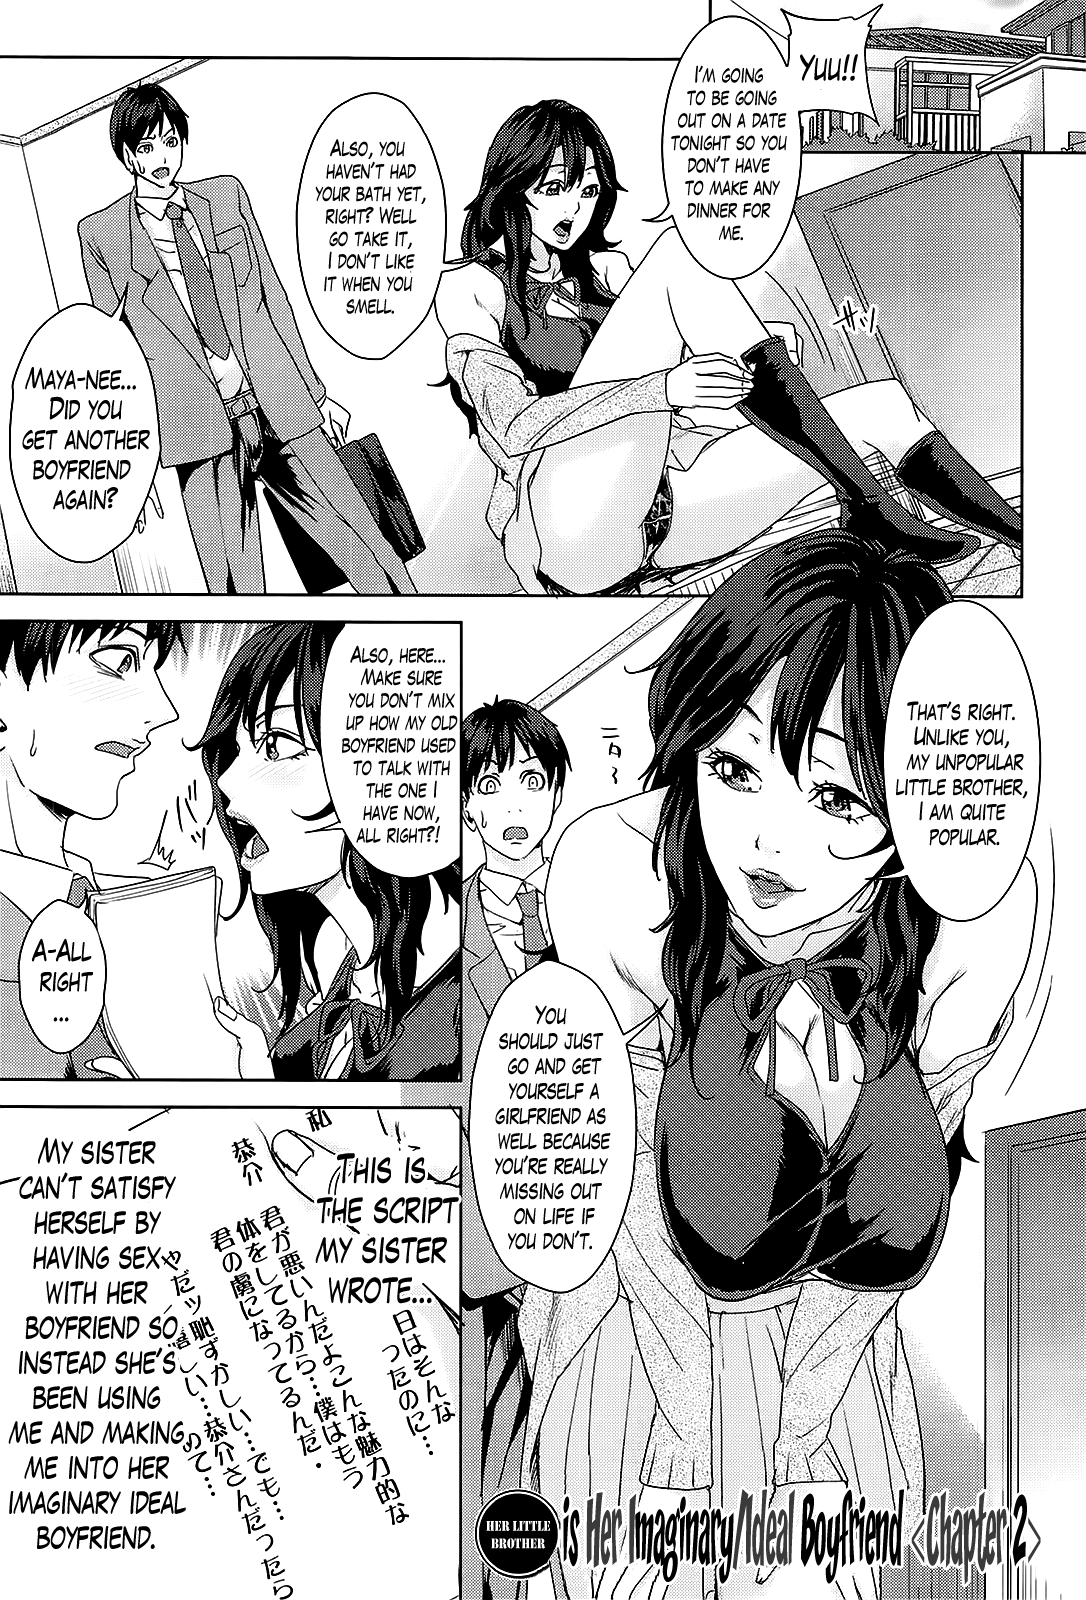 National Married Academy Vol.1 Chapter 7: Her Little Brother Is Her Imaginary/ideal Boyfriend 2 - Picture 1